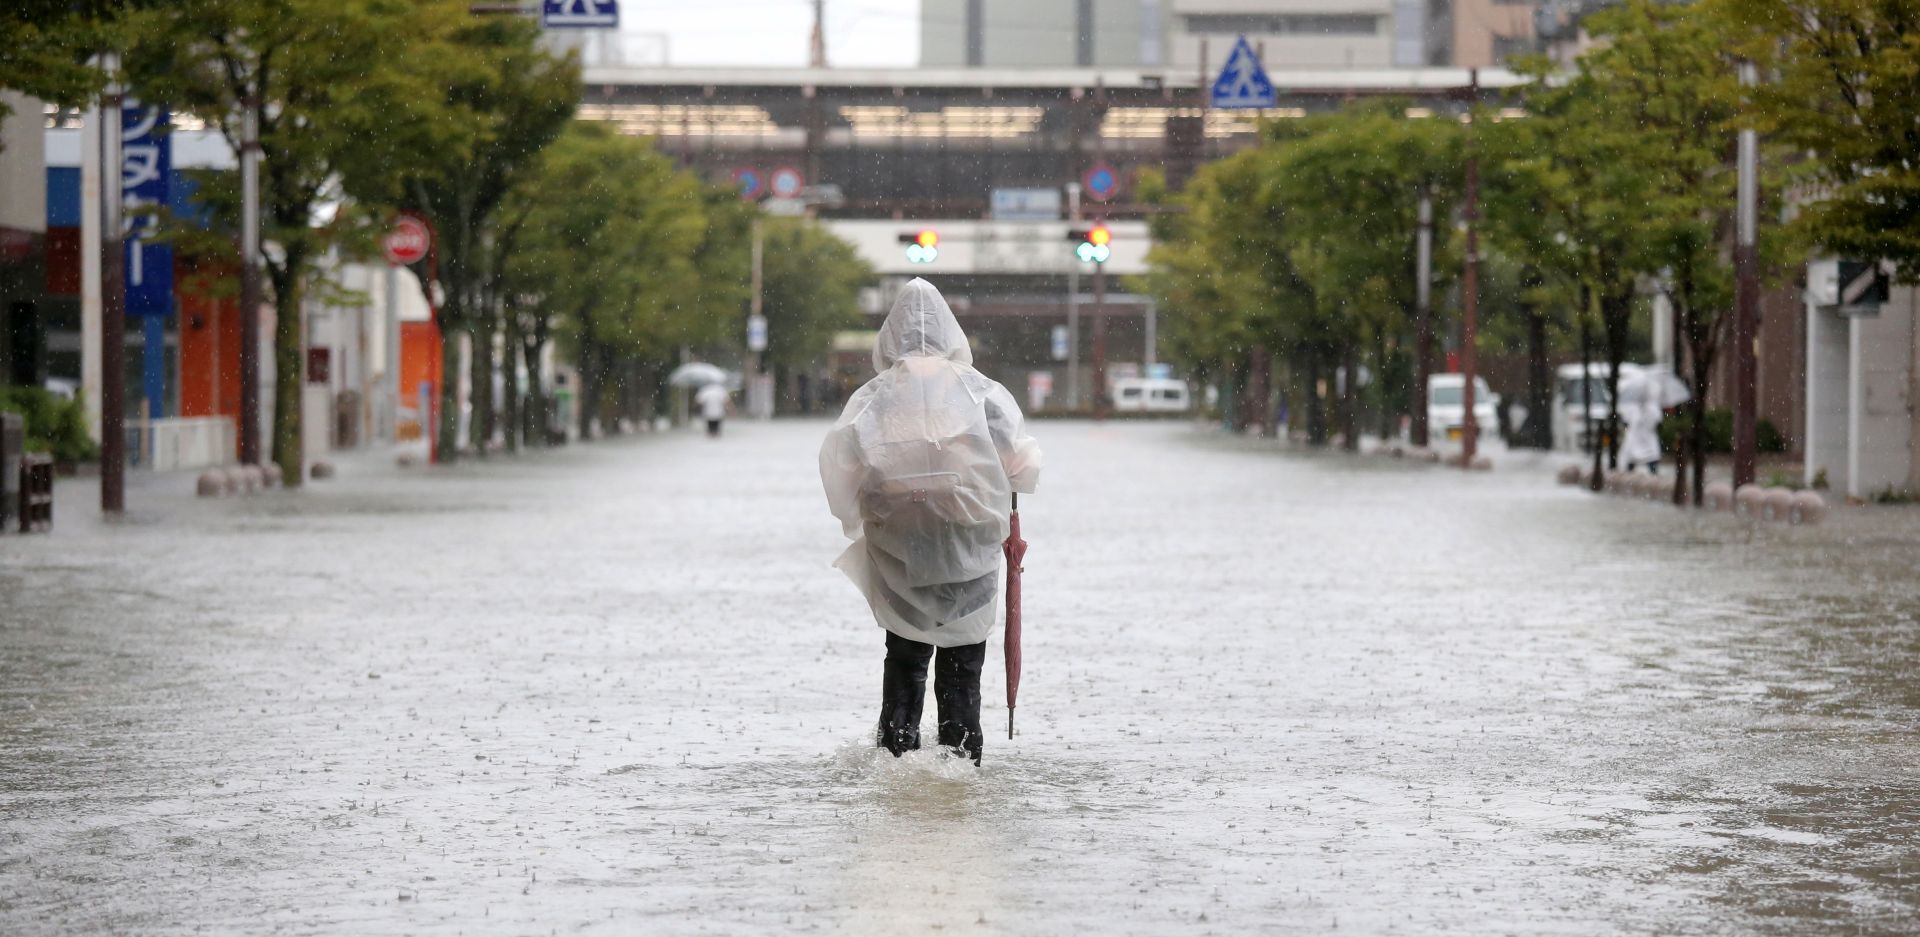 epa07798446 A pedestrian walks in a flooded street near Saga station in Saga, Saga prefecture, southwestern Japan, 28 August 2019. The Japan Meteorological Agency issued emergency heavy rain warnings in the northern part of Kyushu, with maximum level of landslides and flooding.  EPA/JIJI PRESS JAPAN OUT EDITORIAL USE ONLY/  NO ARCHIVES